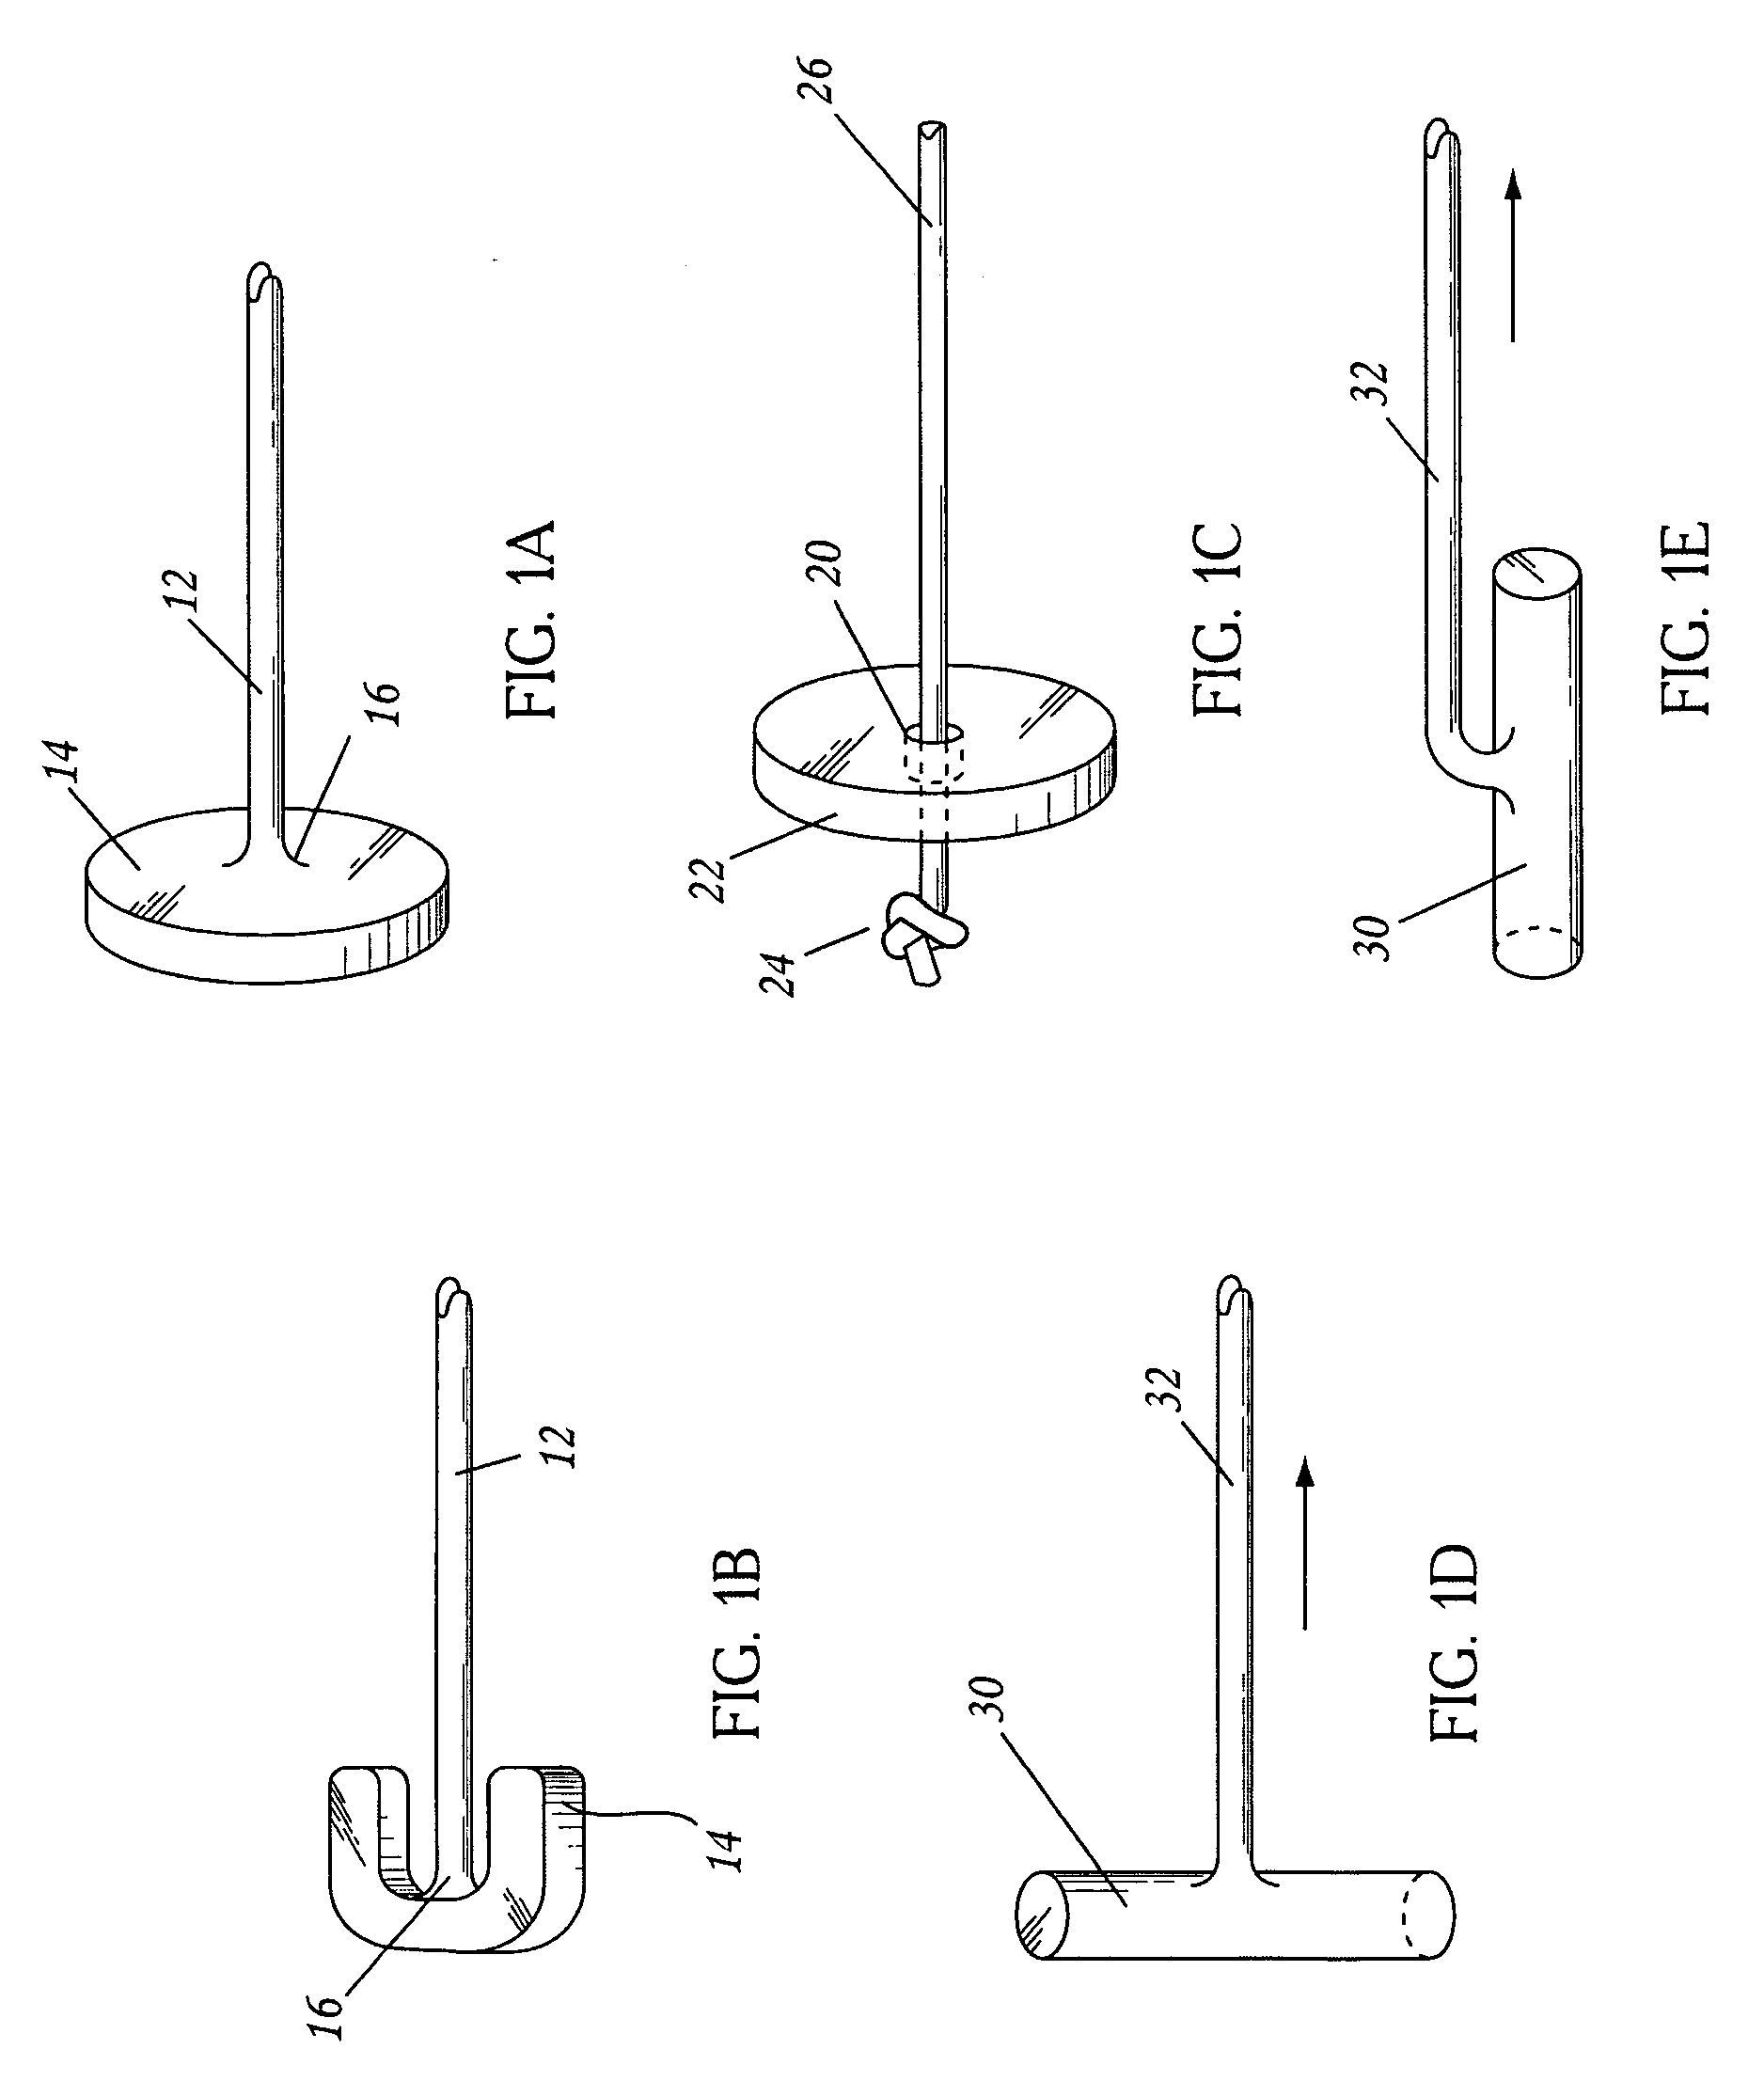 Methods and devices for combined gastric restriction and electrical stimulation